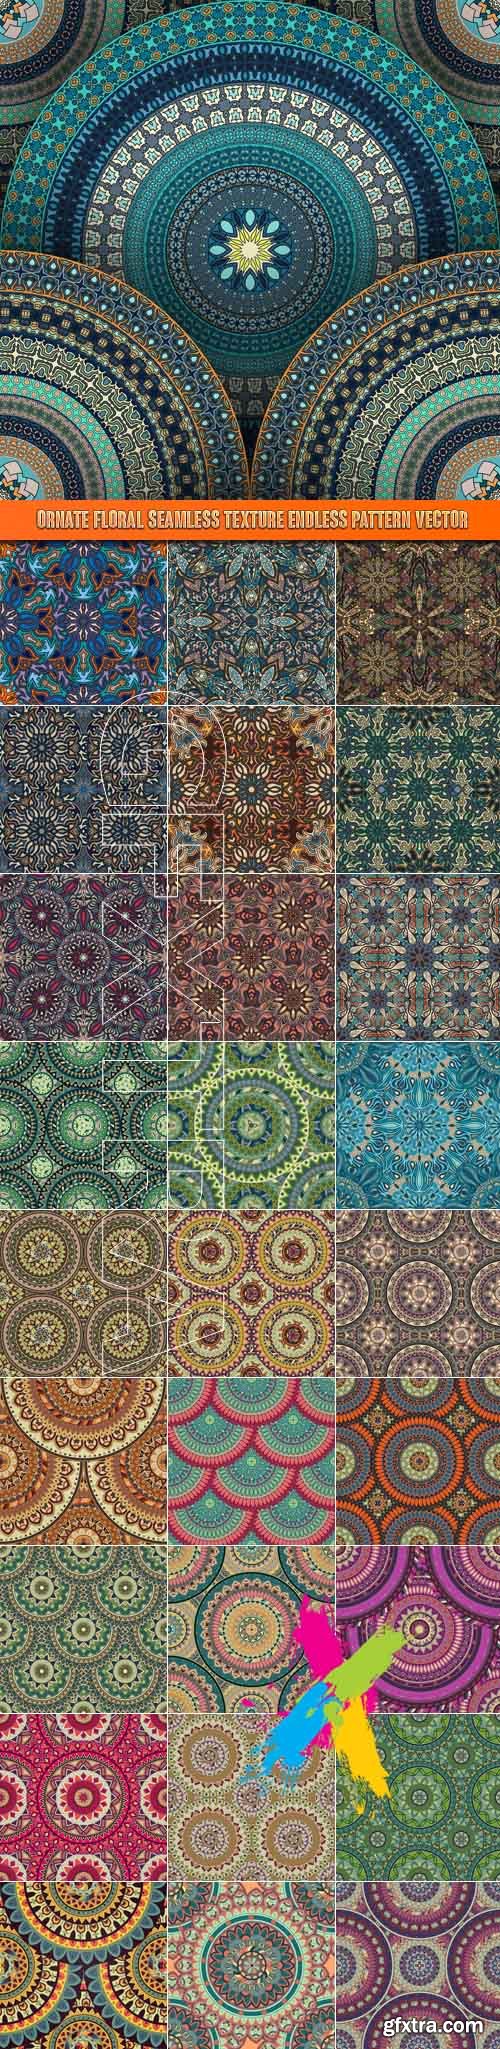 Ornate floral seamless texture endless pattern vector